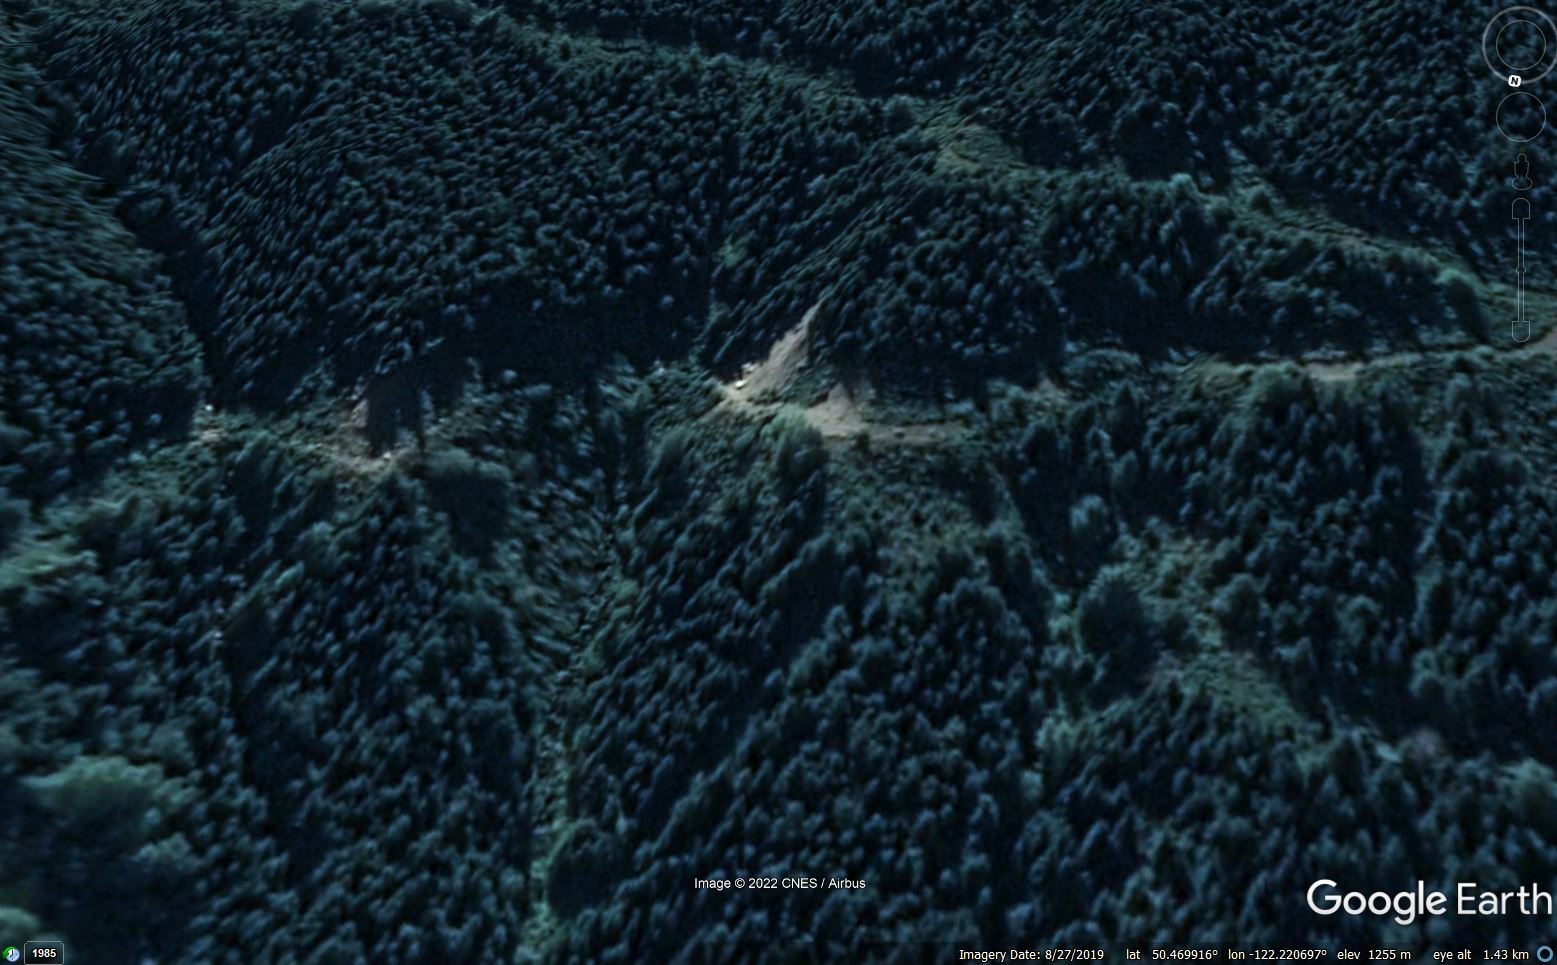 Google Earth image show small landslides on the resource road close to the source of the Duffey Lake landslide.